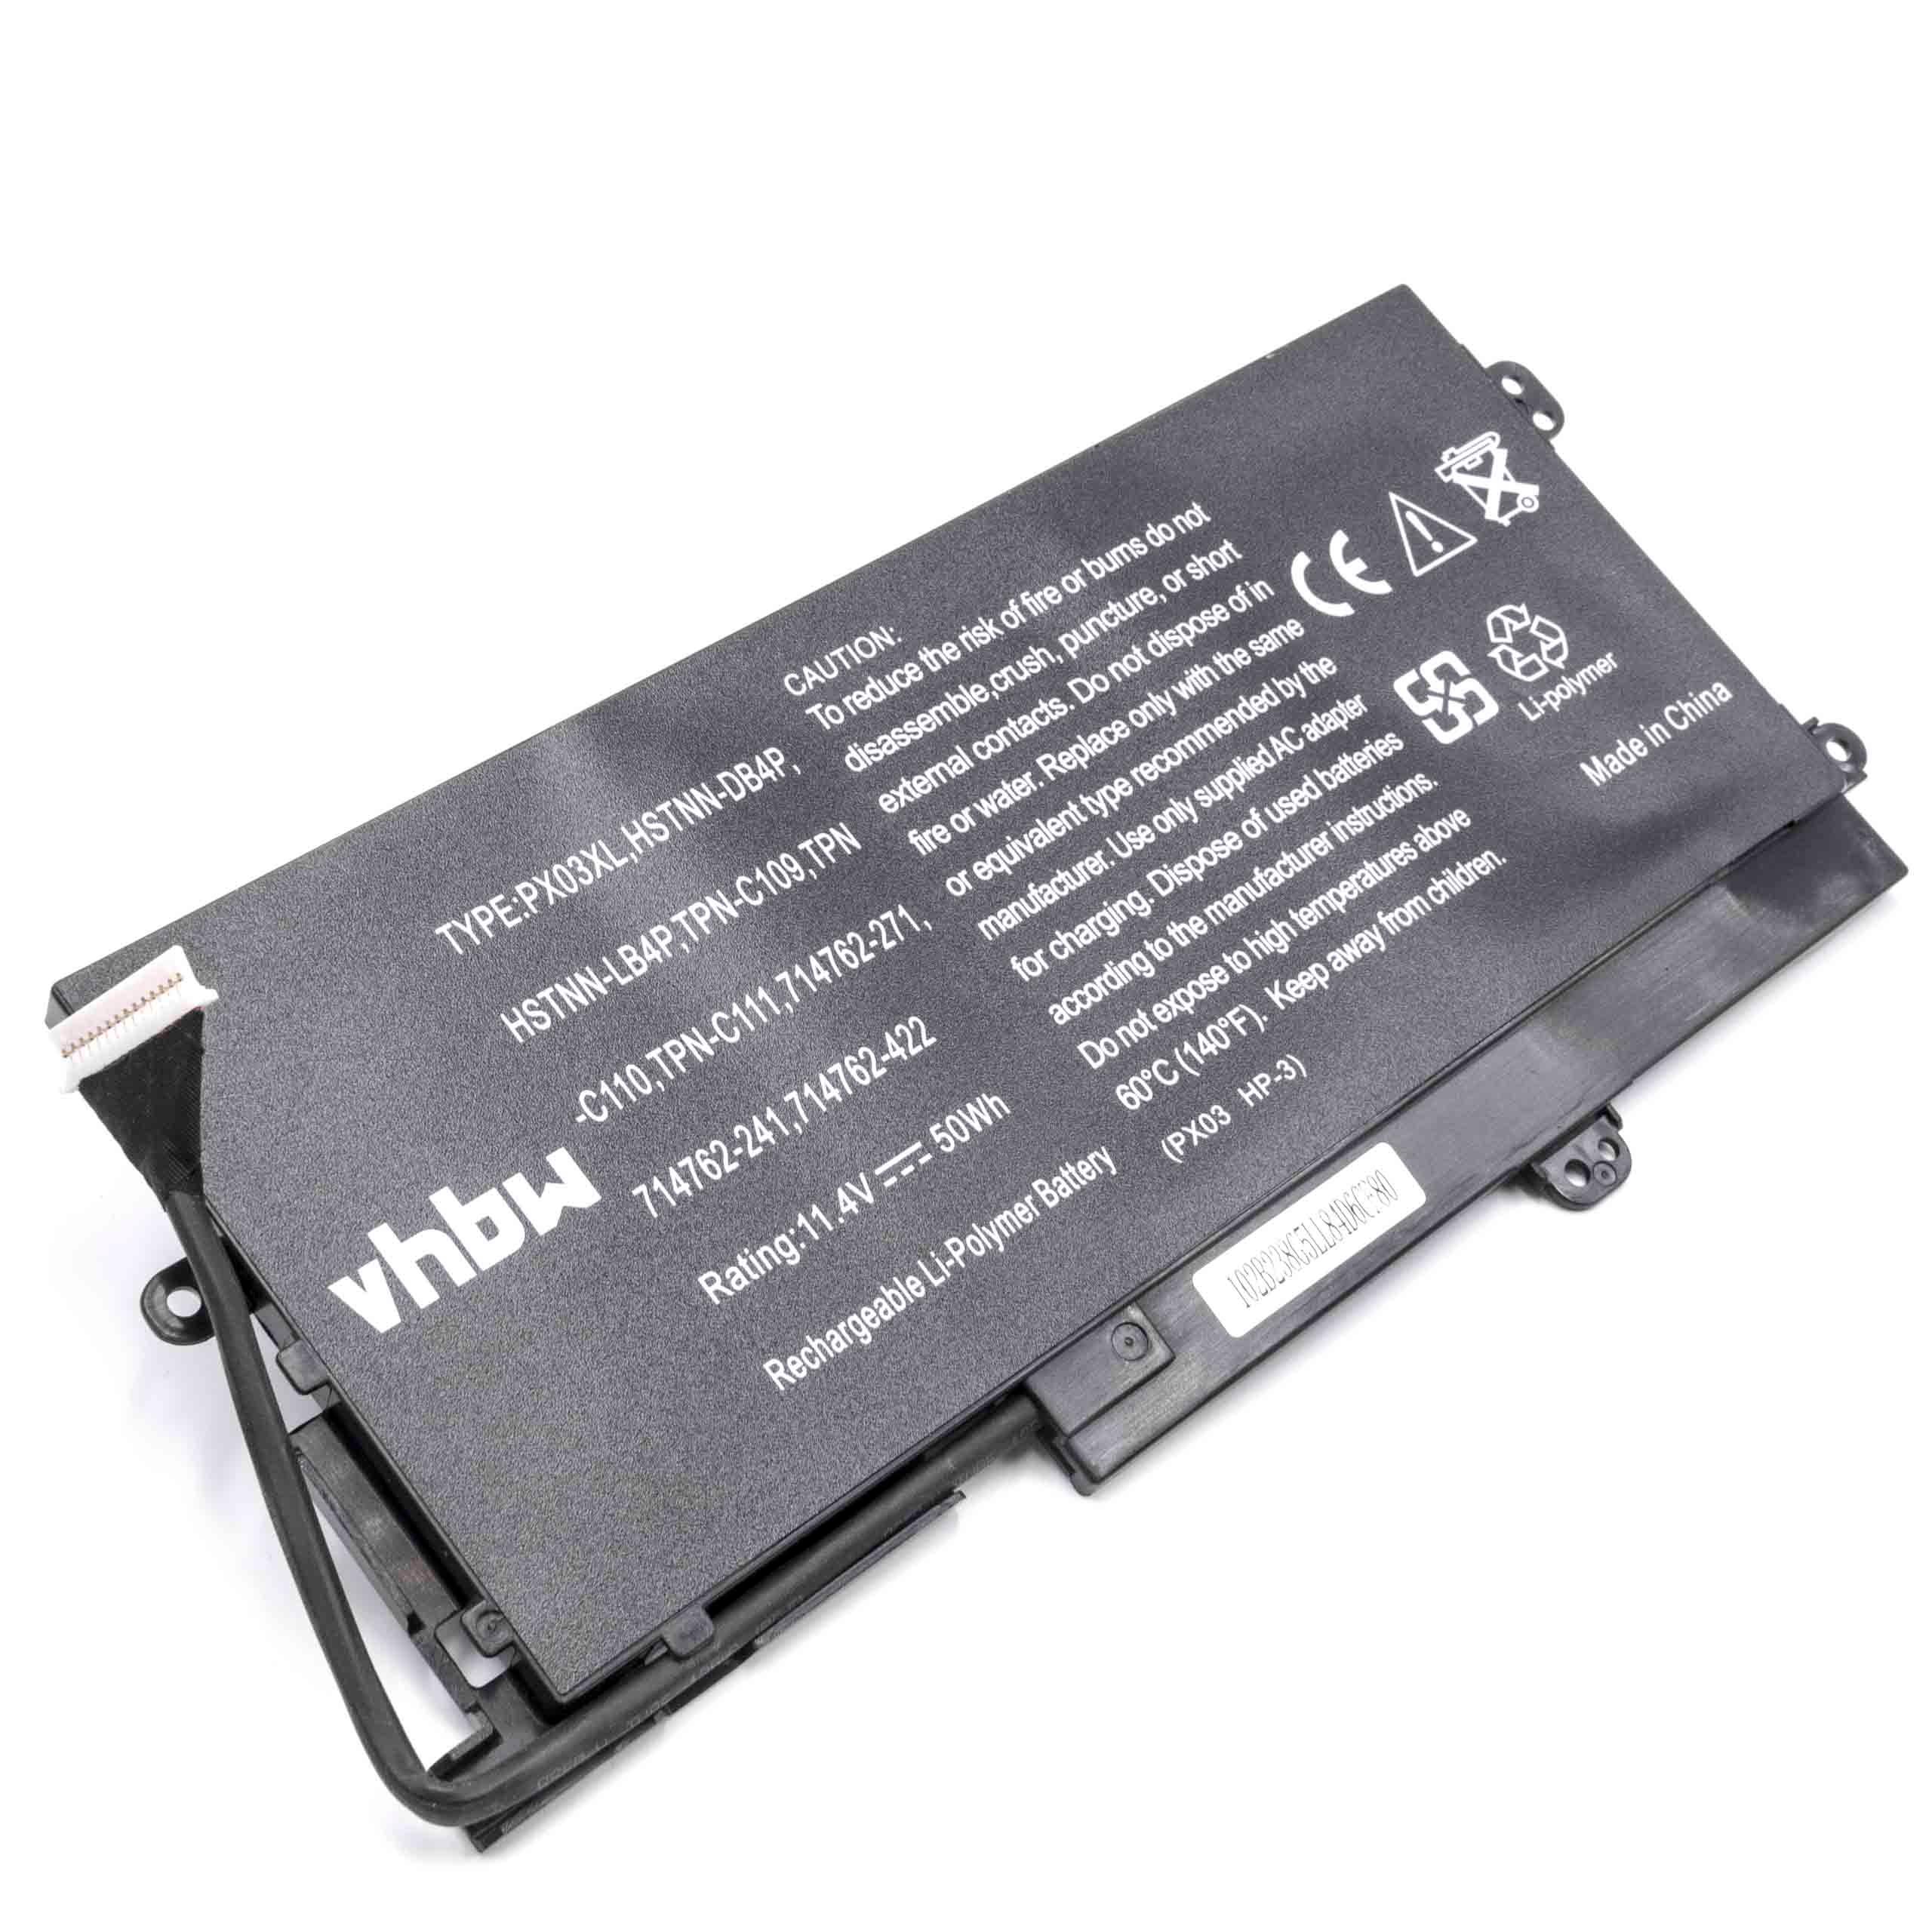 Notebook Battery Replacement for HP 714762-271, 714762-2C1, 714762-1C1, 714762-241 - 4000mAh 11.4V Li-polymer